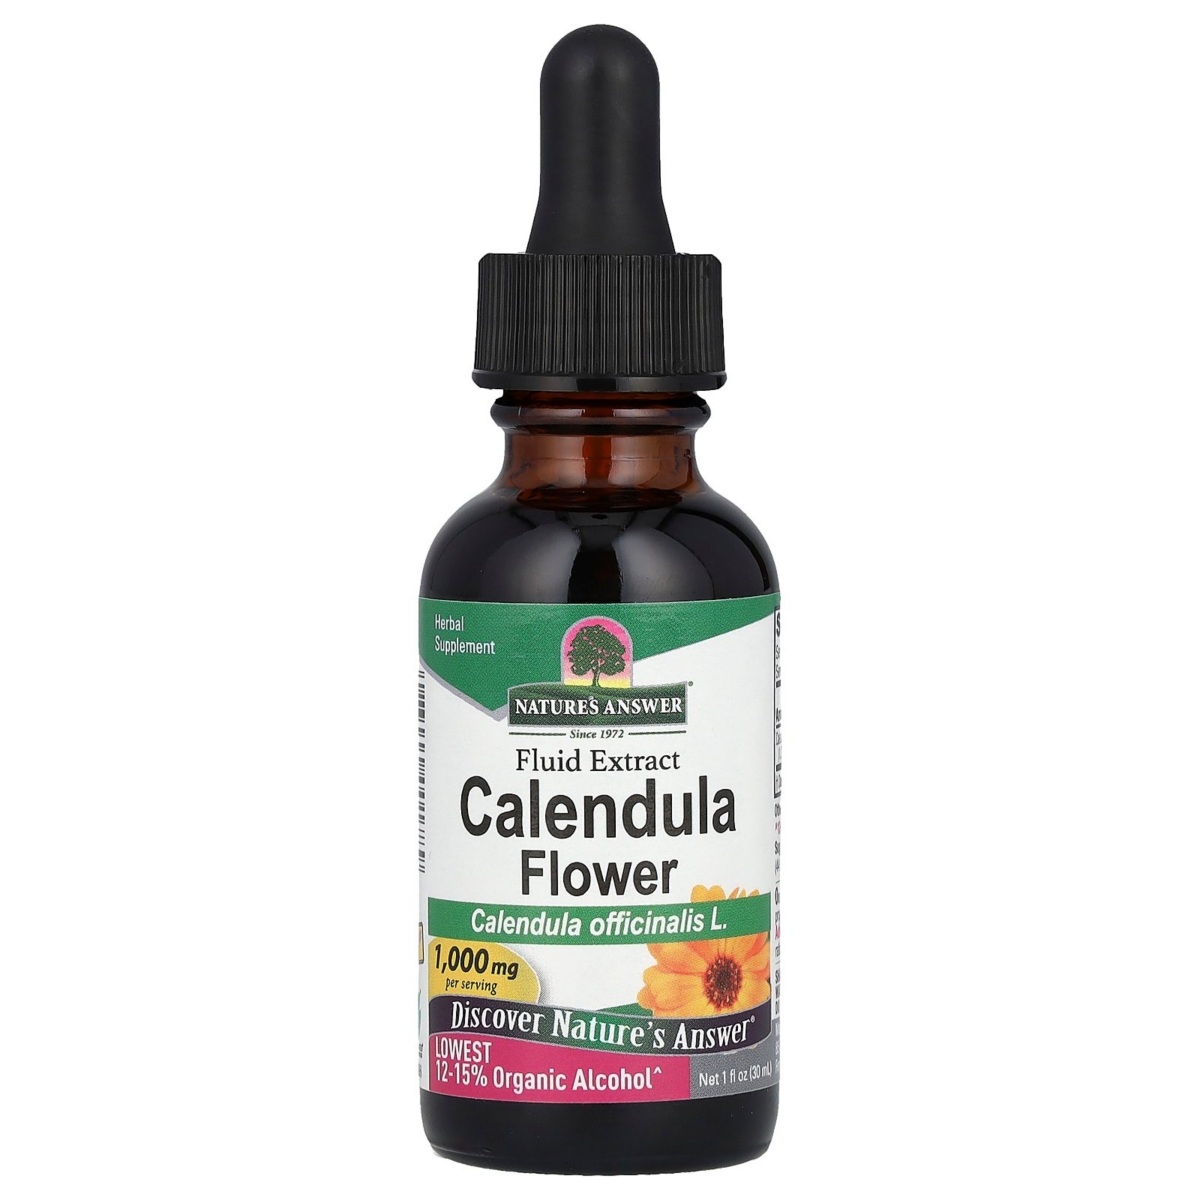 Calendula Flower Fluid Extract Lowest Alcohol 1 000 mg - 1 fl oz (30 ml) - Assorted Pre-Pack